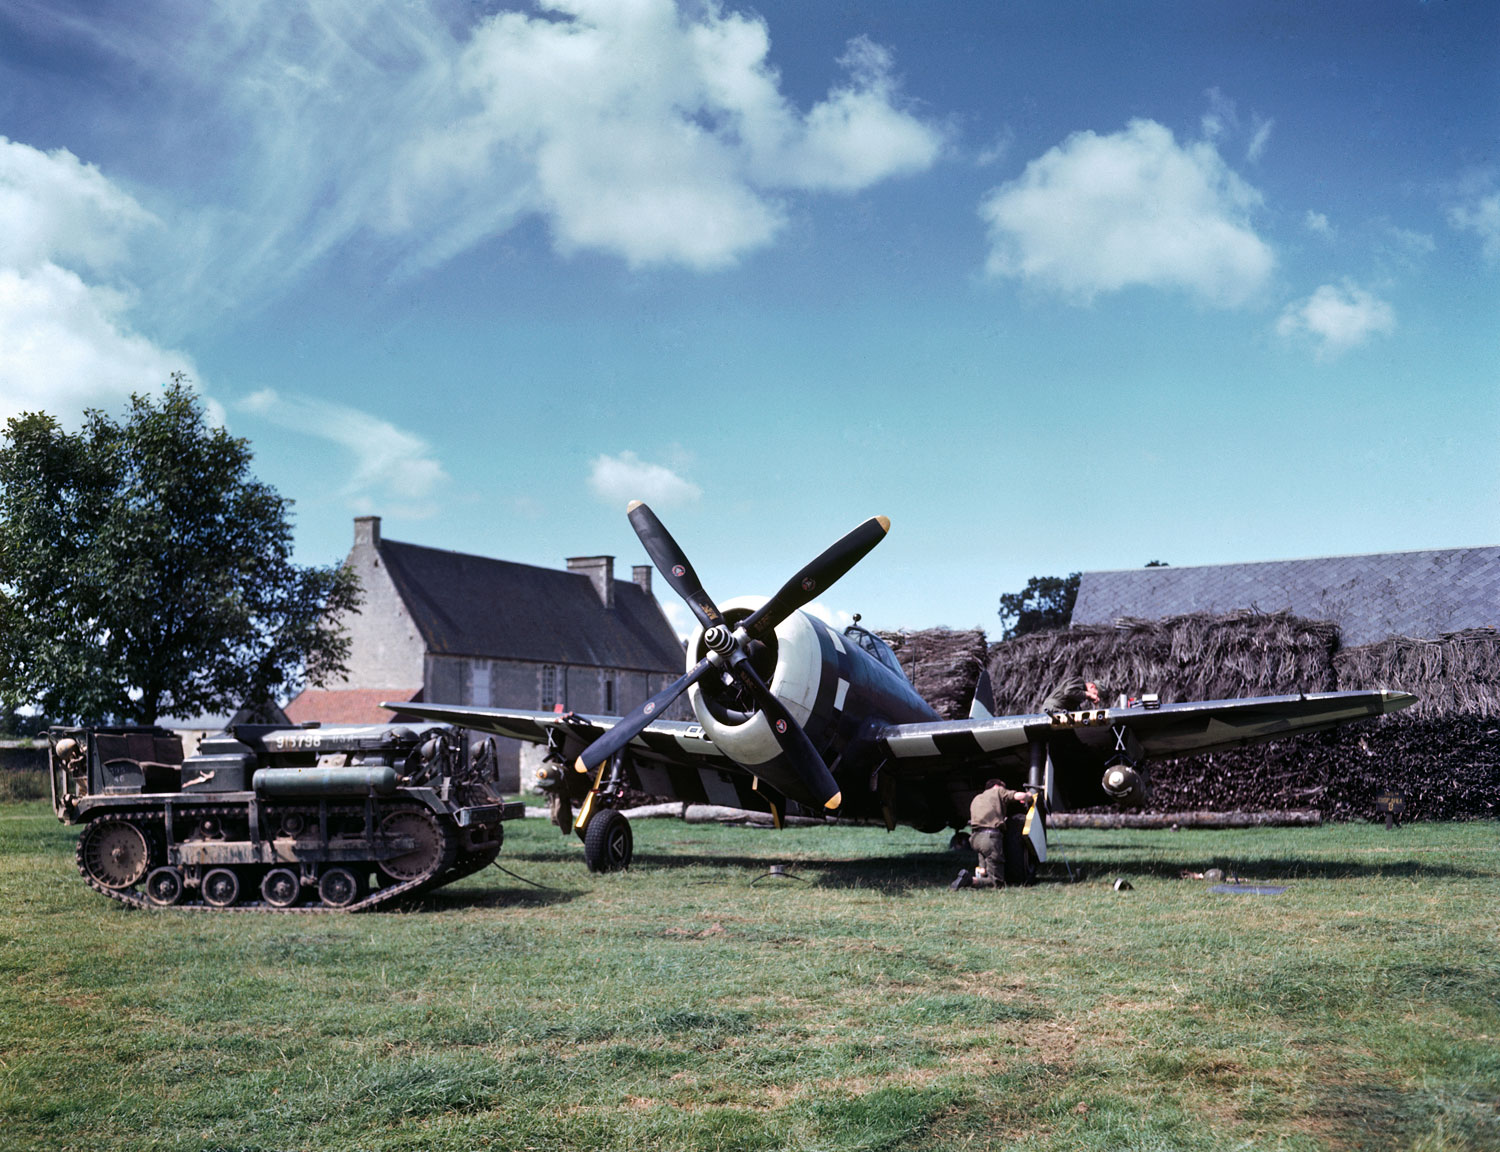 Maintenance work on an American P-47 Thunderbolt in a makeshift airfield in the French countryside, 1944.